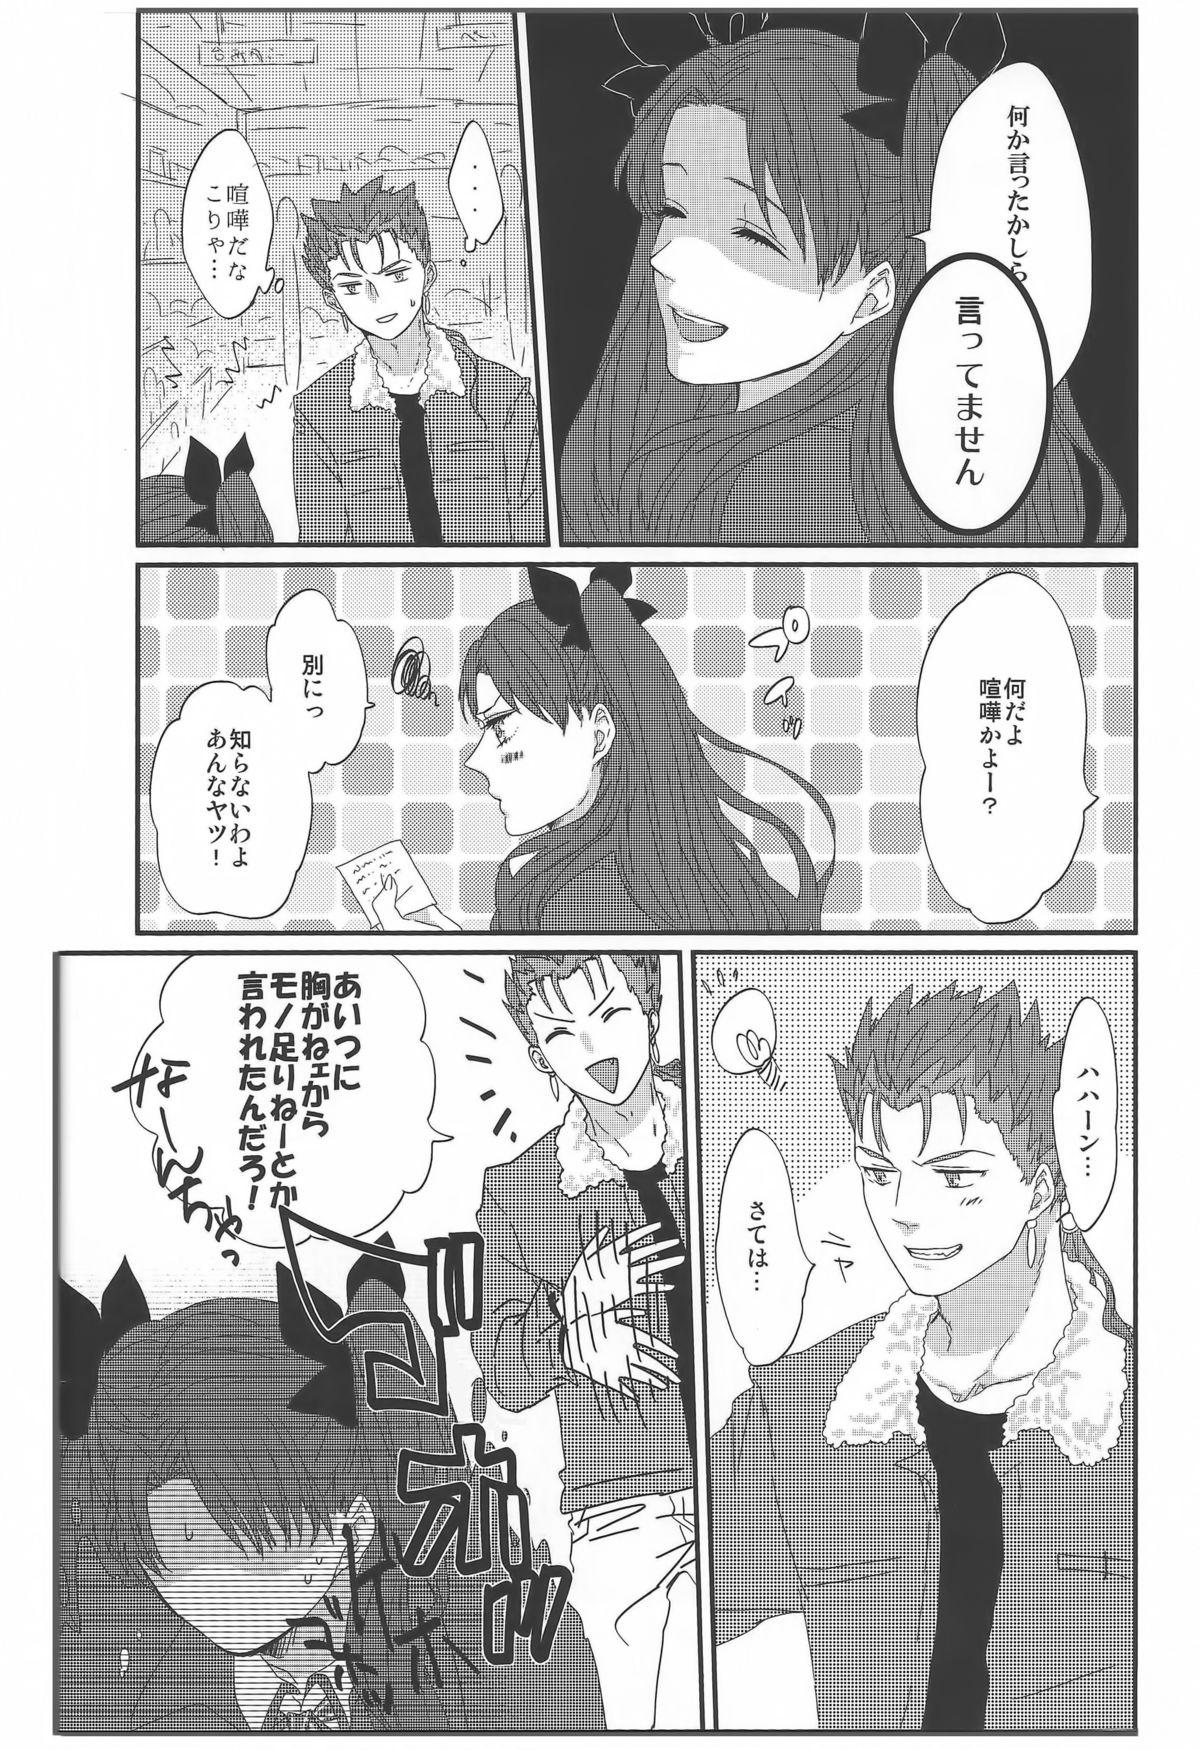 From Miss Perfect no xxx - Fate stay night One - Page 11